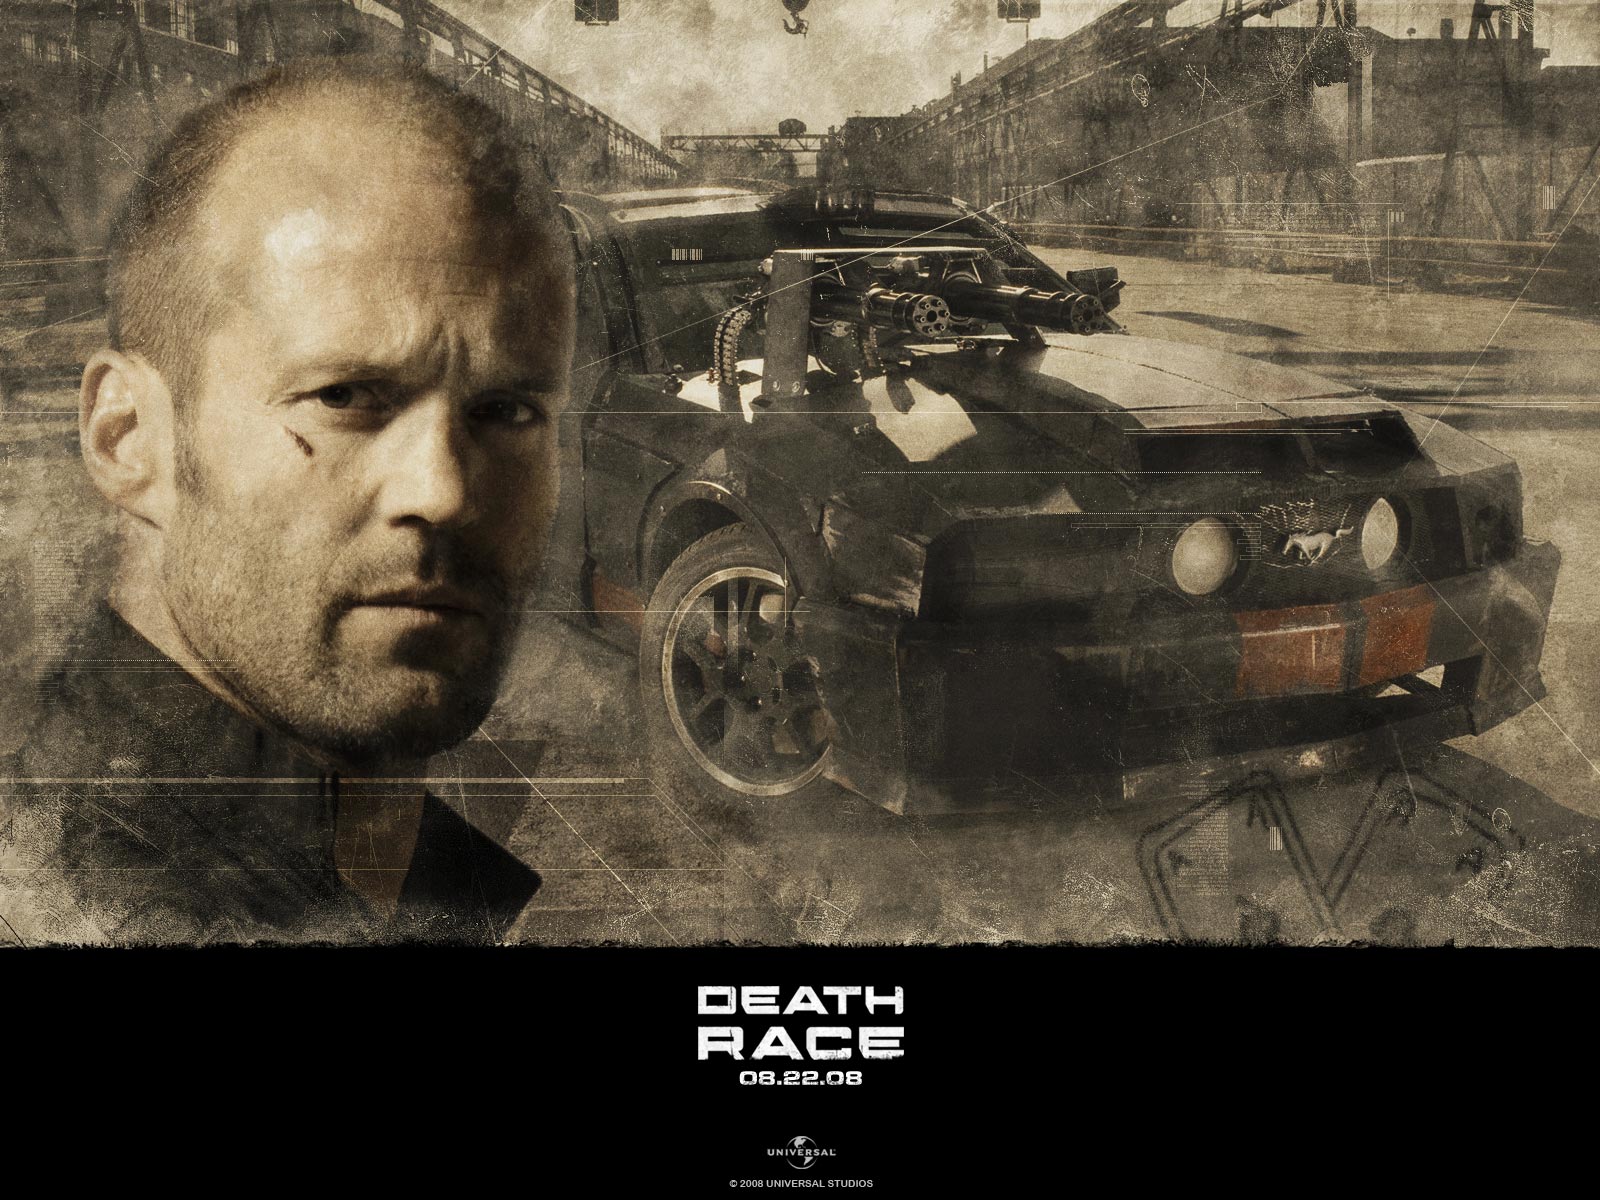 Death Race wallpapers and images - wallpapers, pictures, photos